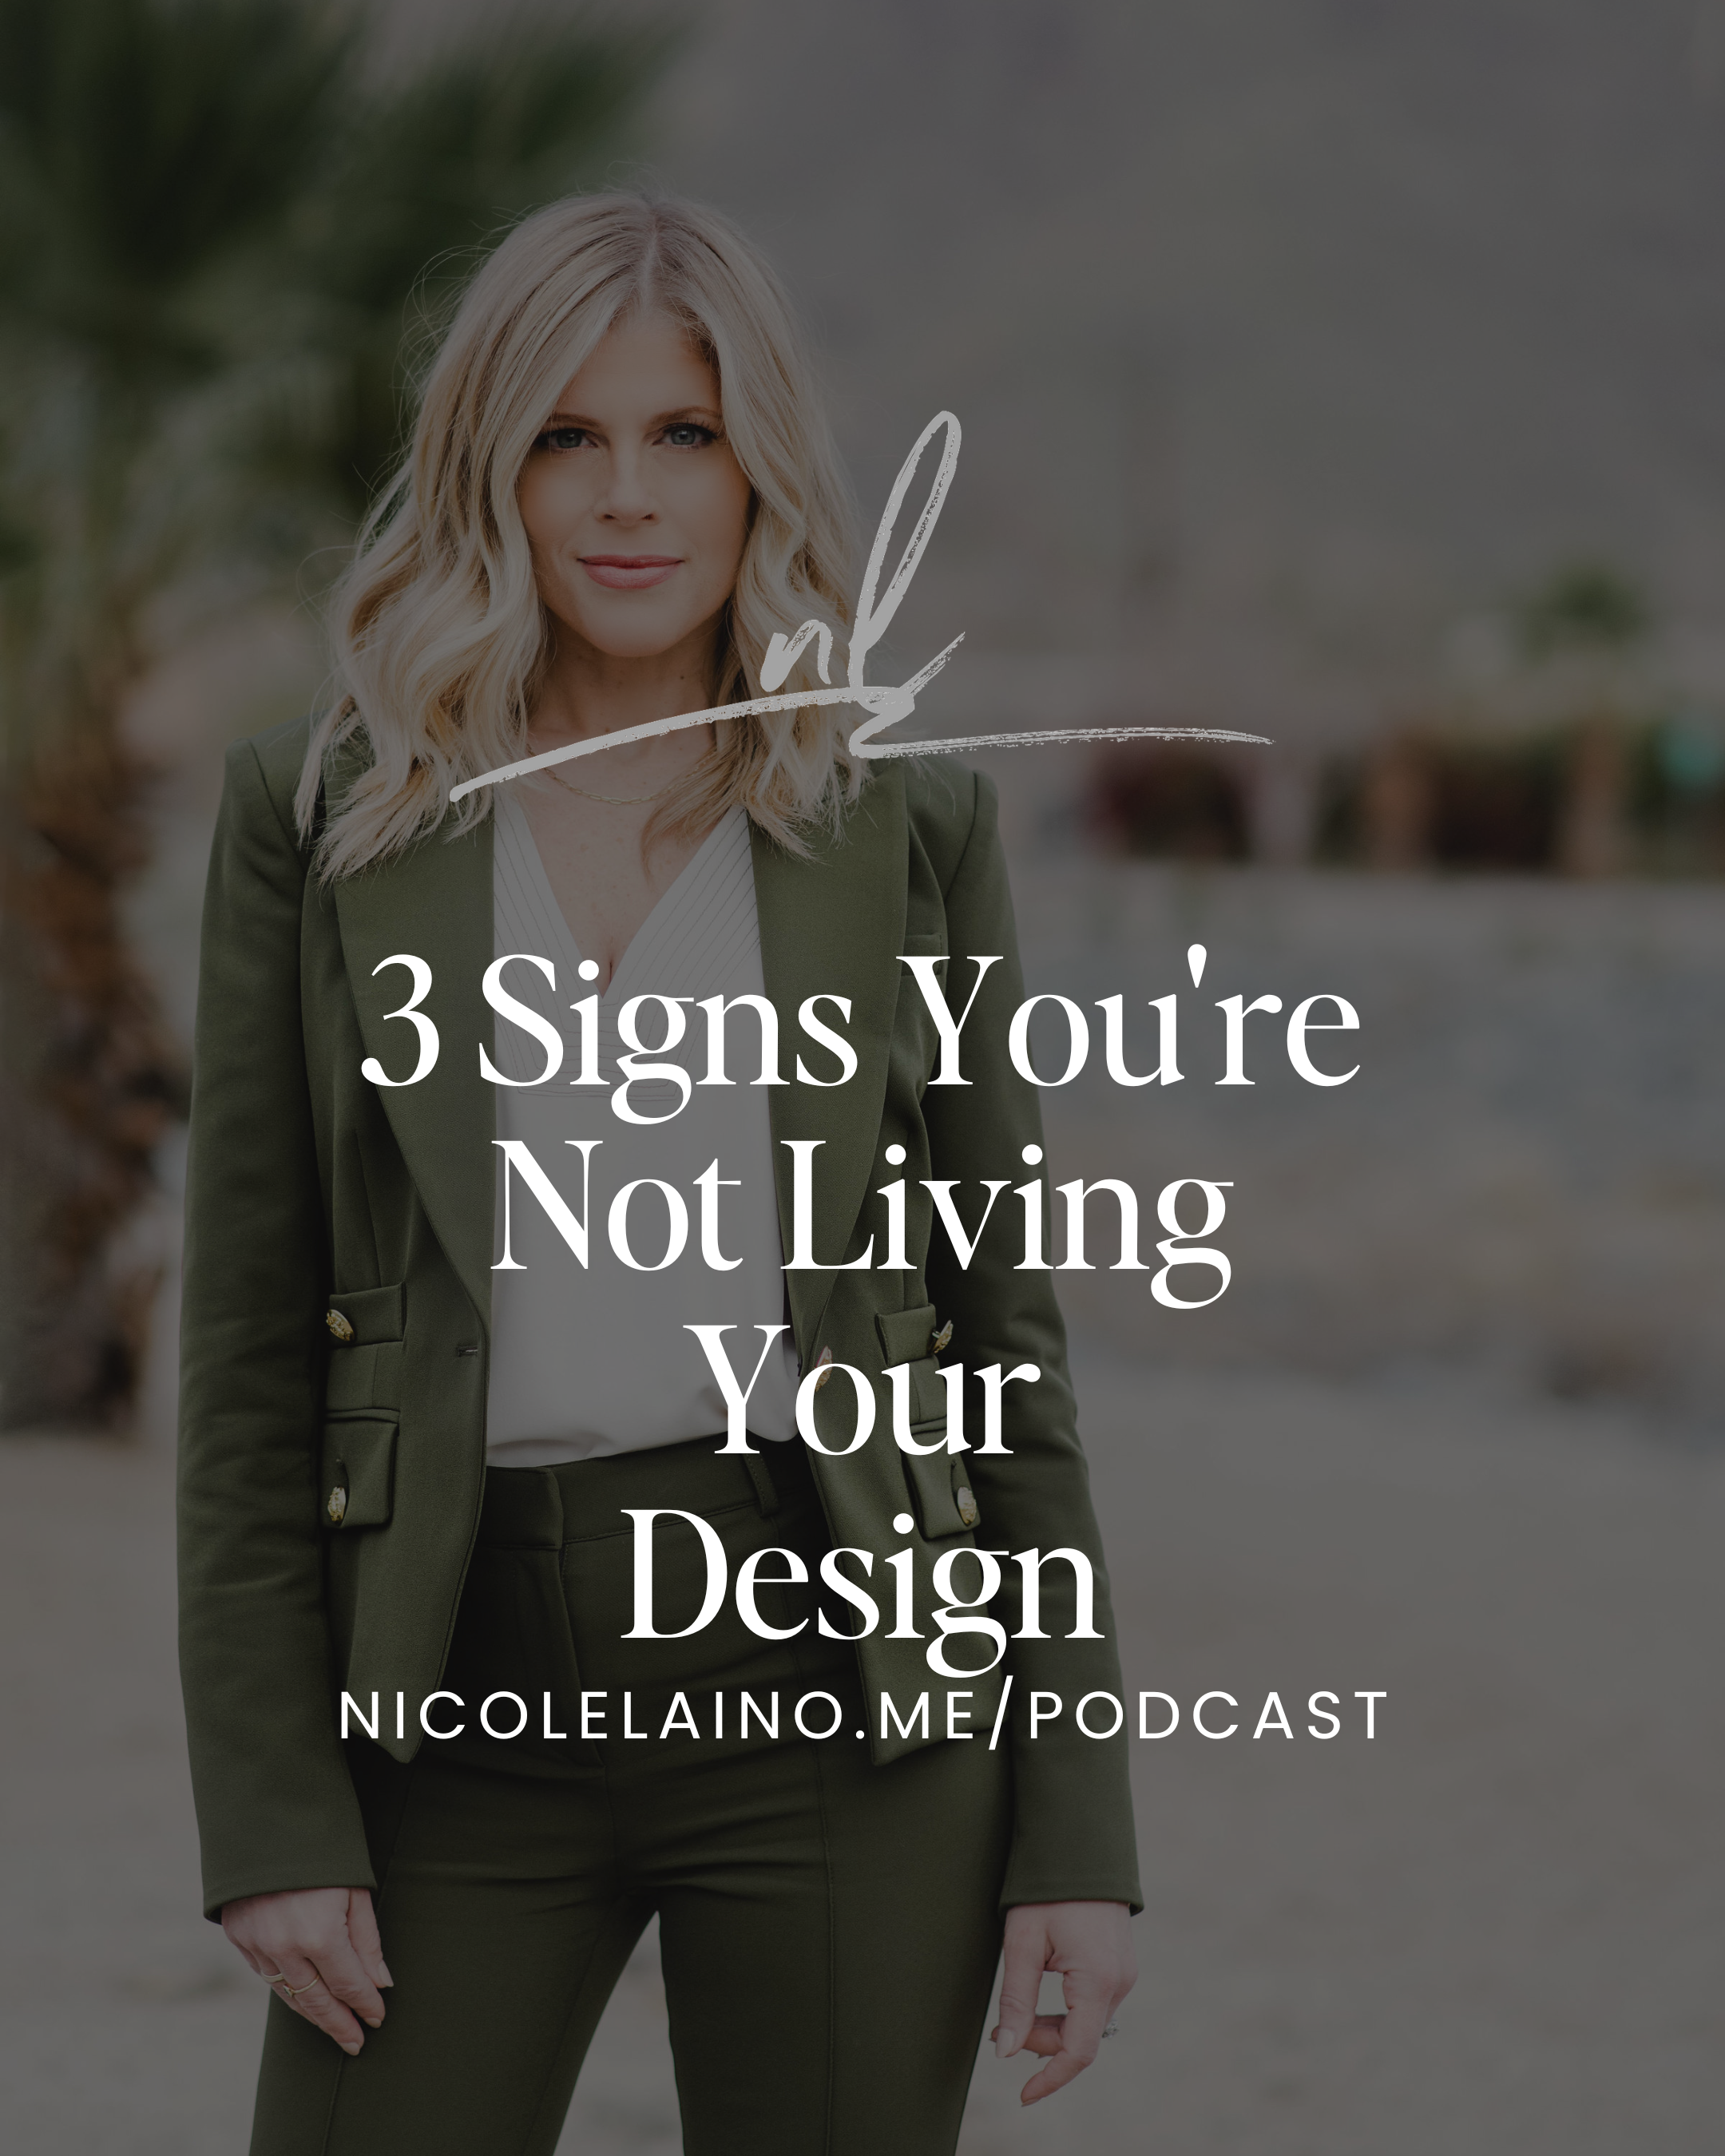 3 Signs You're Not Living Your Design